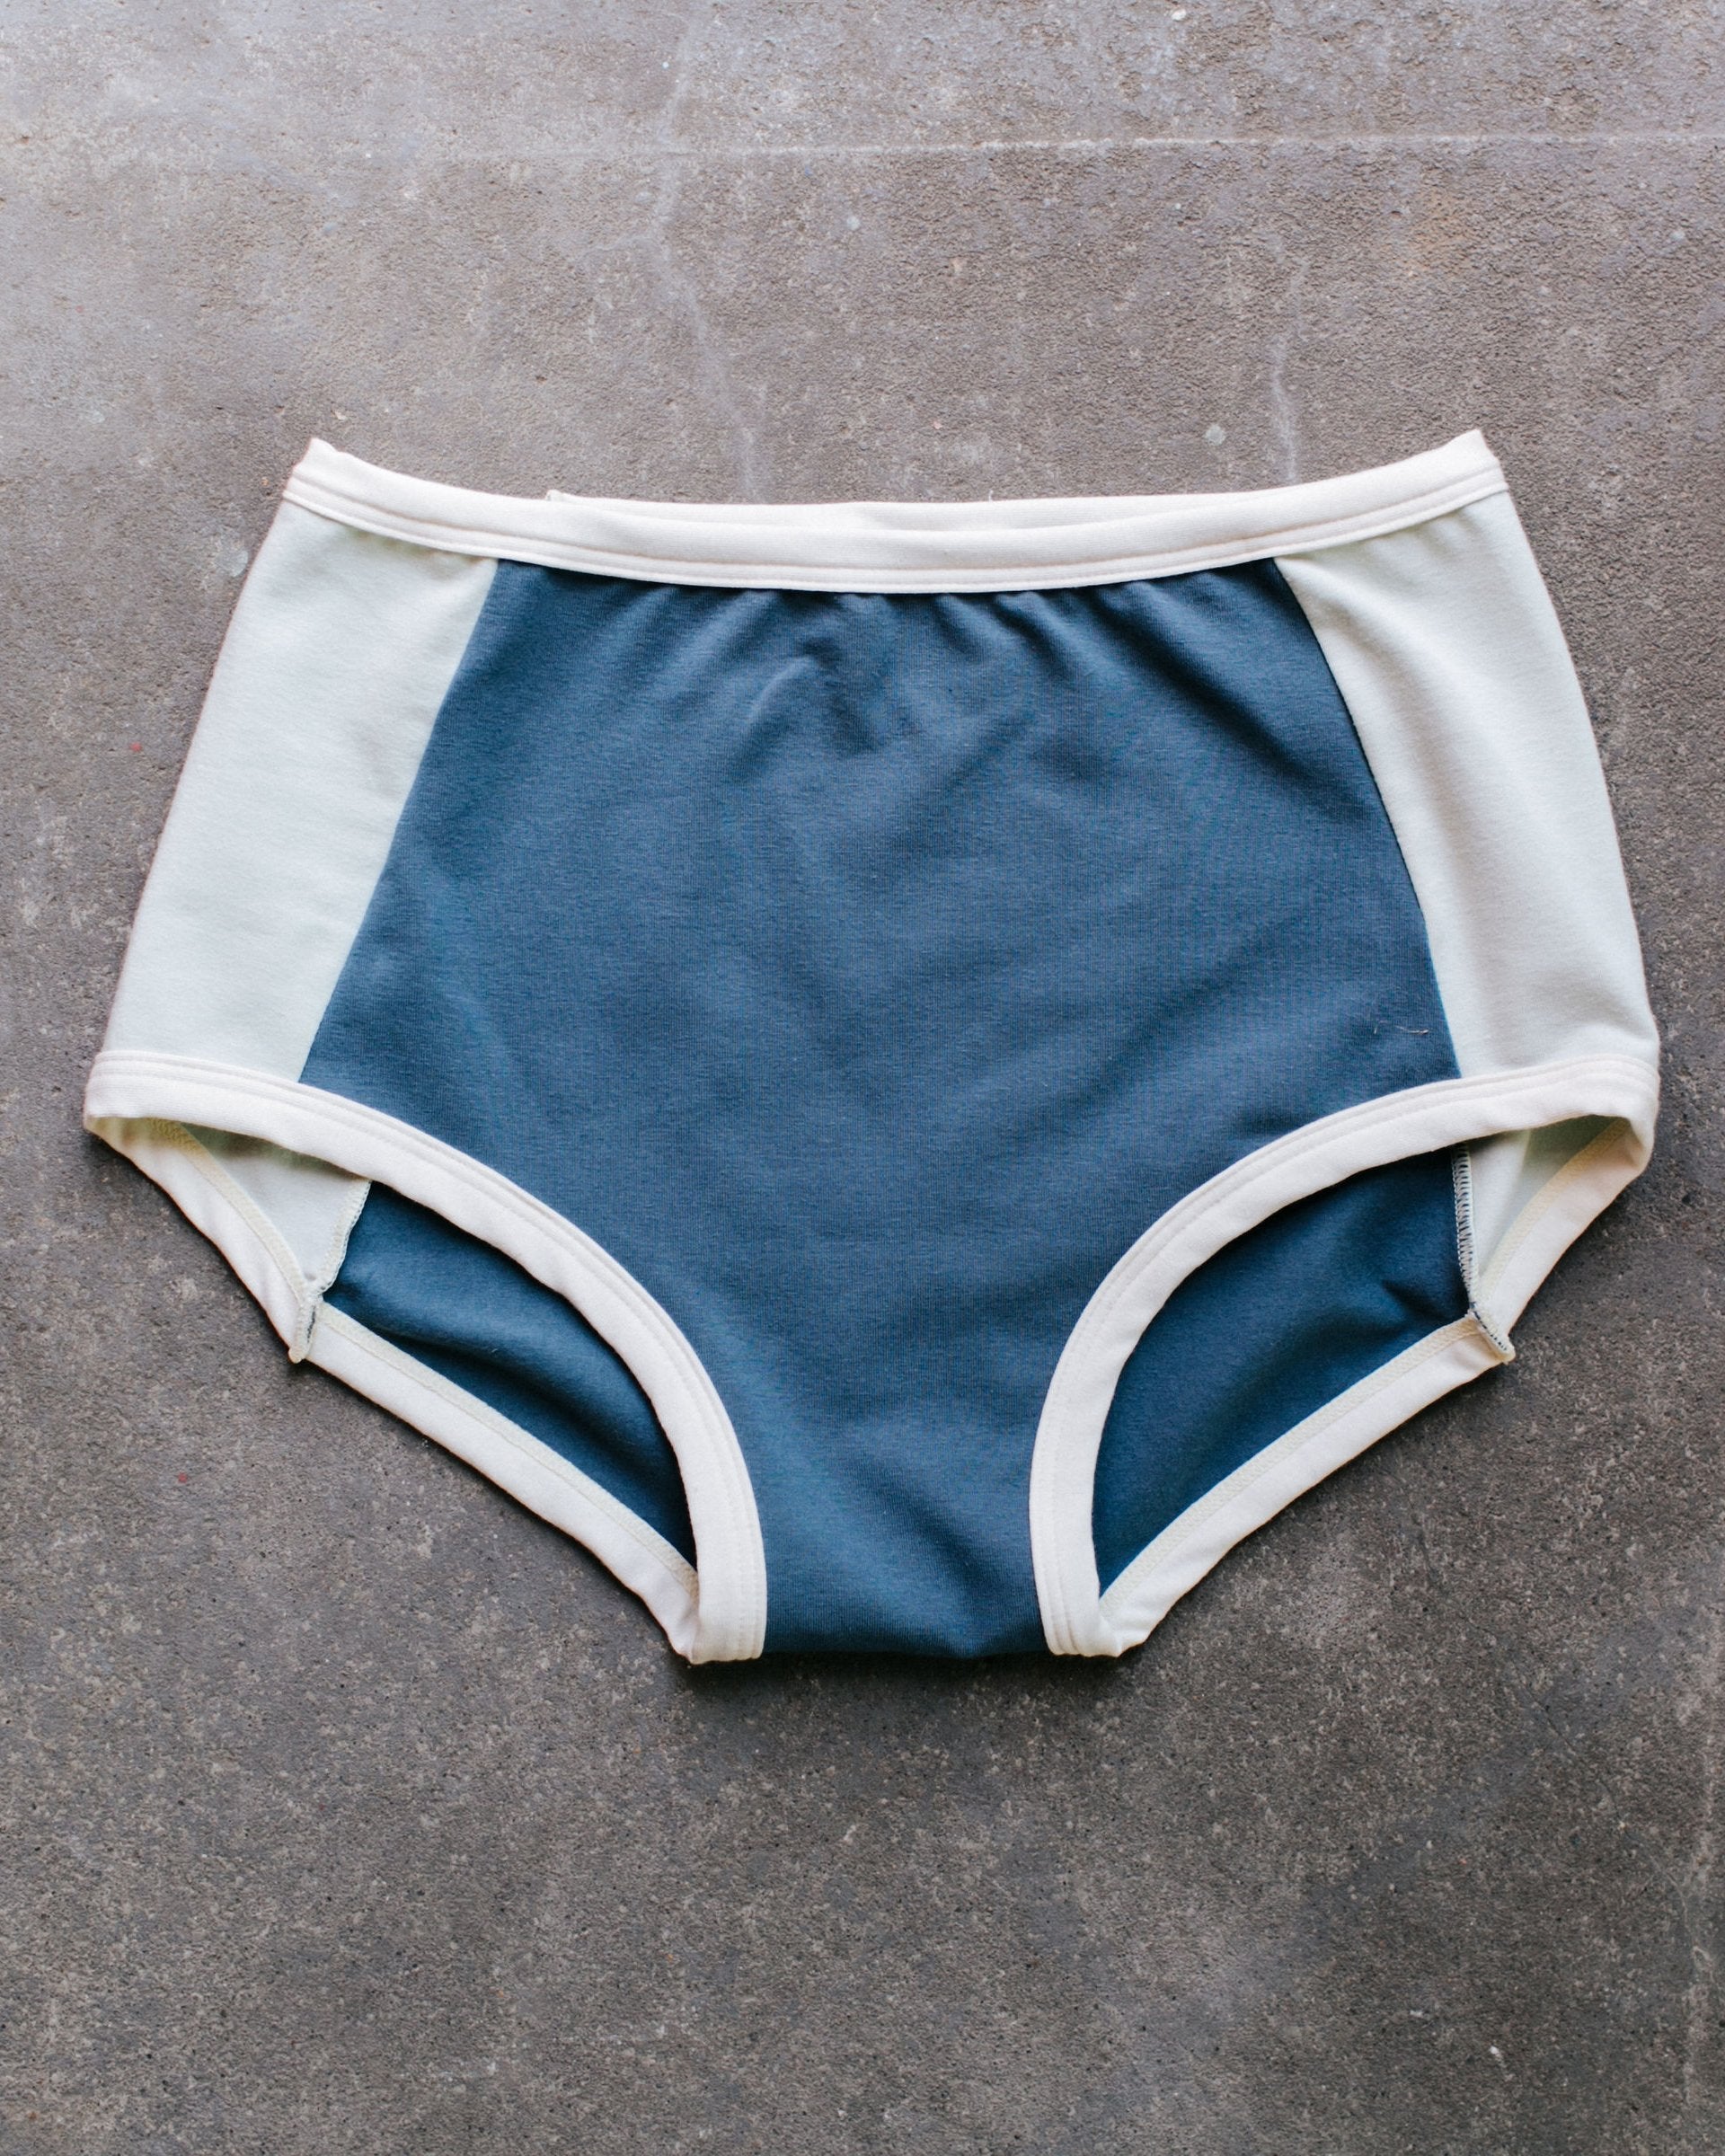 Flat lay of Thunderpants Organic Cotton Original style underwear with Stormy Blue front and back panels and Dried Sage side panels.